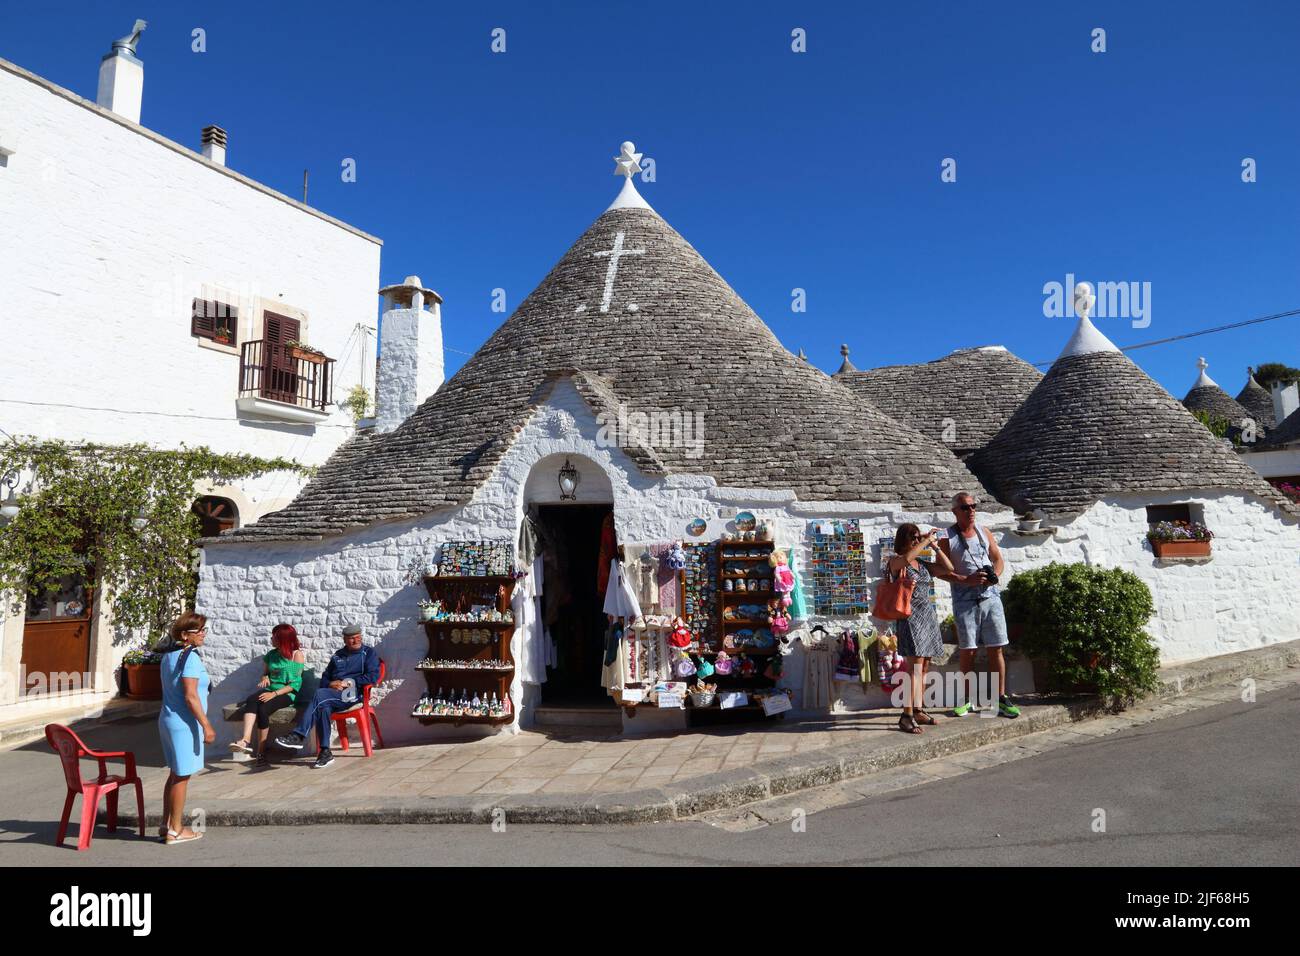 ALBEROBELLO, ITALY - MAY 29, 2017: People visit a souvenir shop in Alberobello, Italy. Alberobello and its trulli houses are a UNESCO World Heritage S Stock Photo